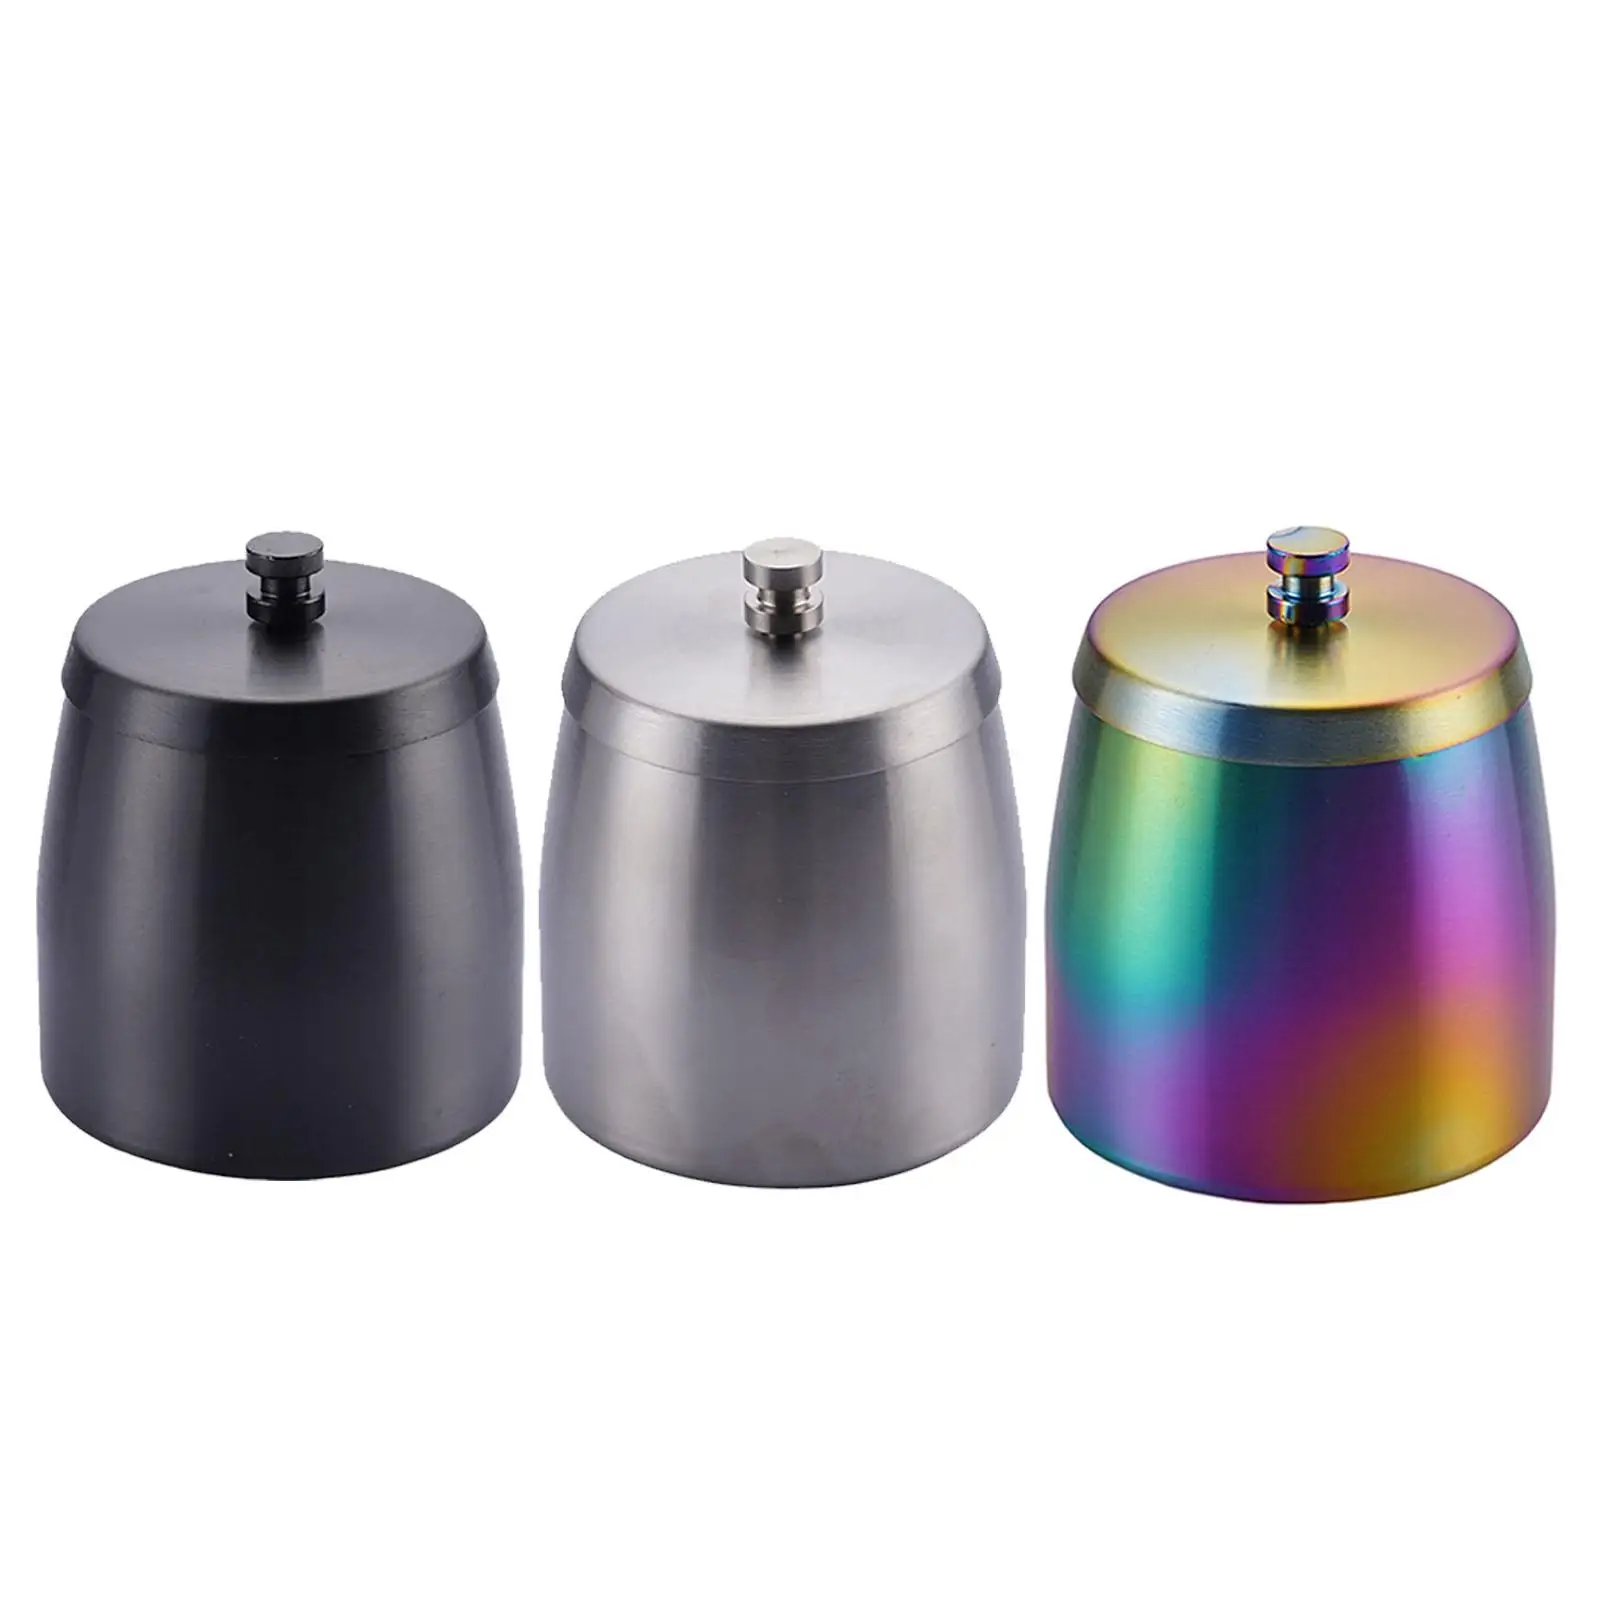 Stainless Steel  , Windproof, Smokeless, Odorless, Decorations, Cylindrical Shape Car , for Balc